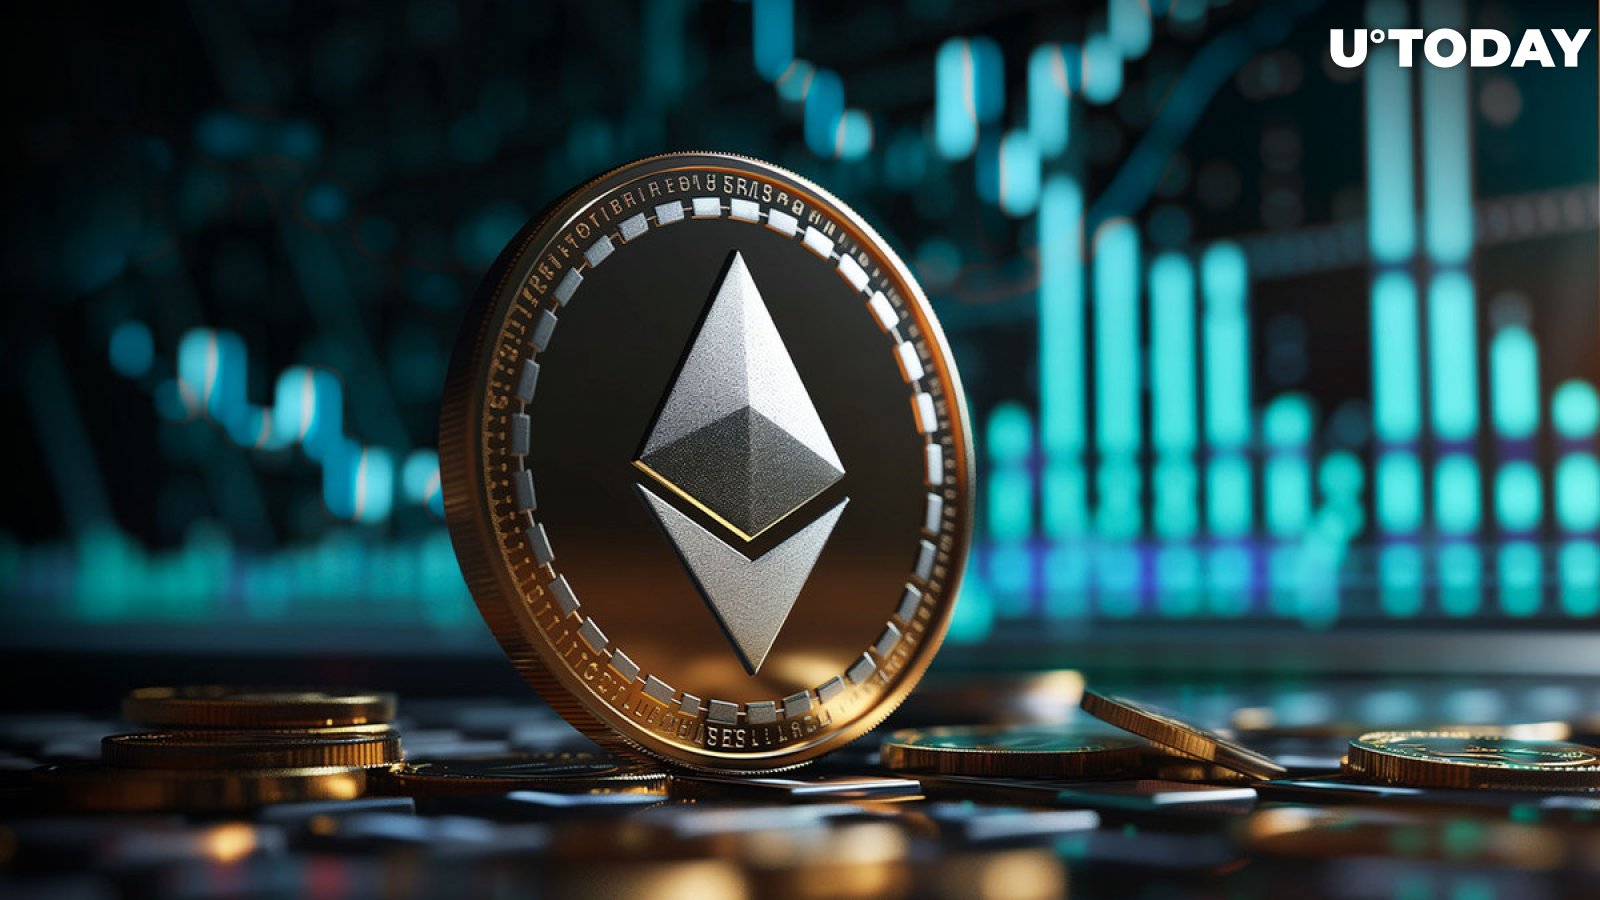 Ethereum (ETH) to Touch $3,000, Here Are 3 Things to Know